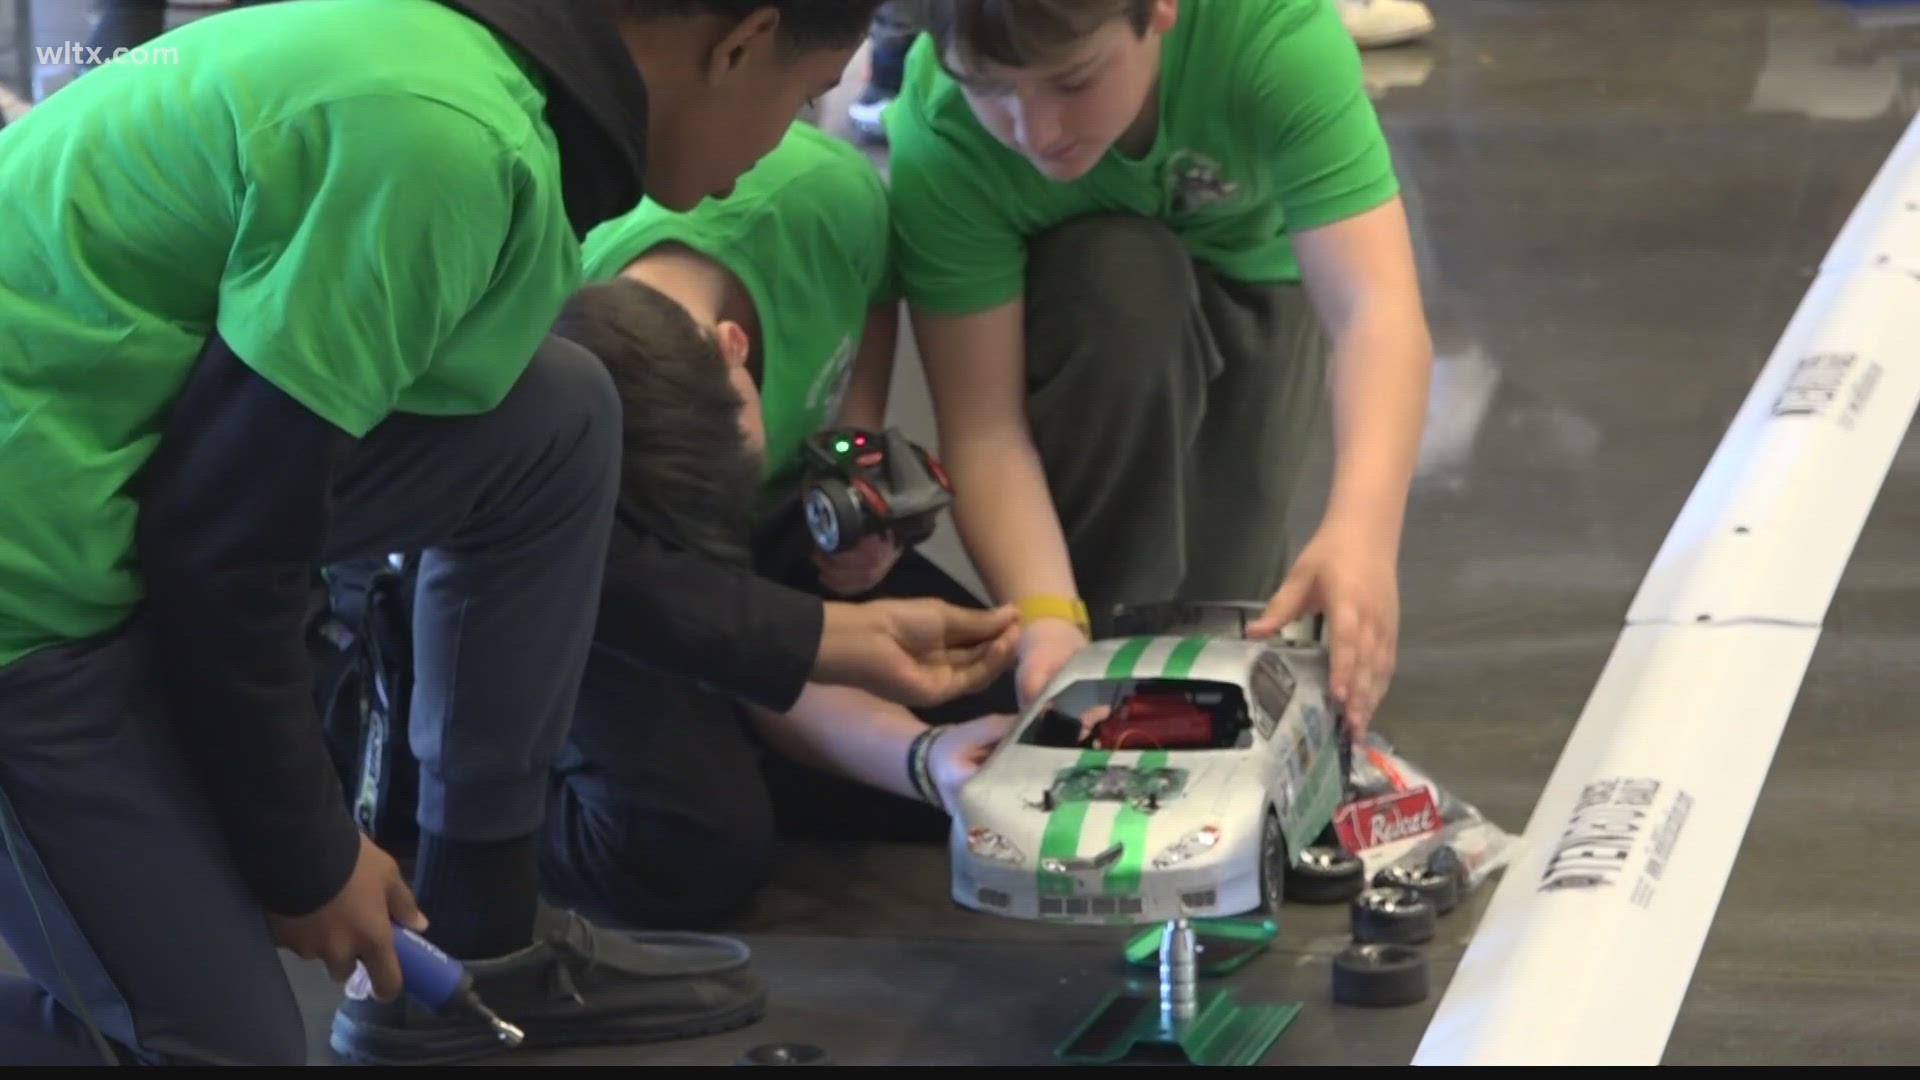 The STEM contest teams were judged not only on speed by enterprise and graphic design.